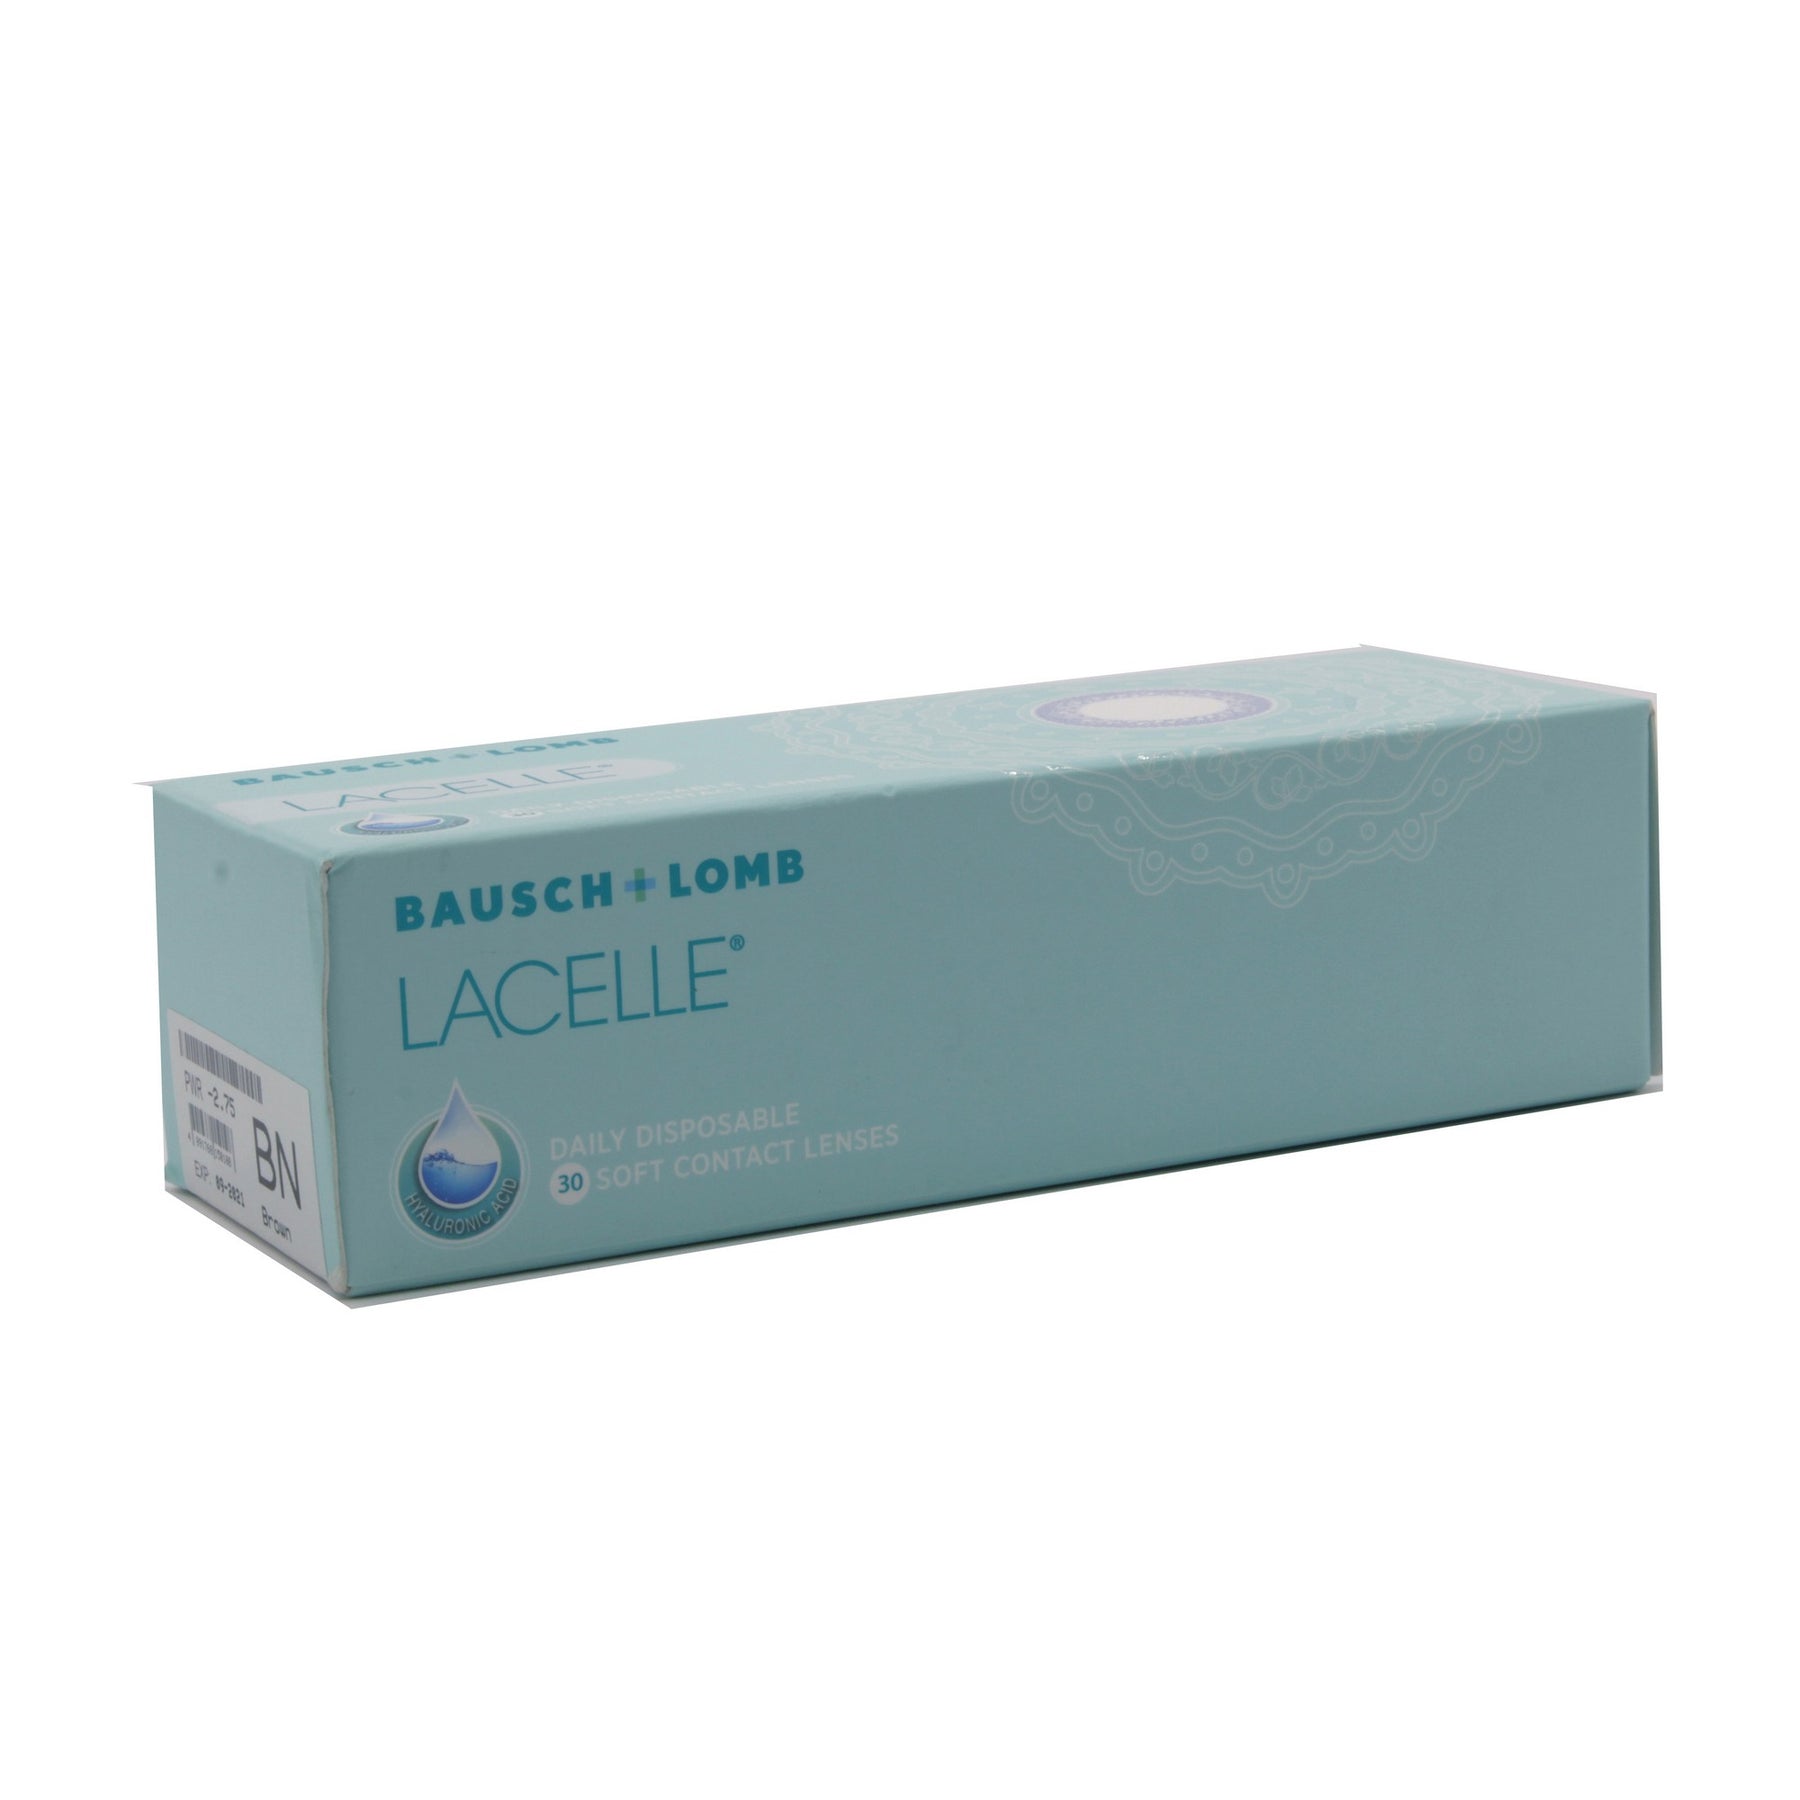 B&L LACELLE daily disposable colored contact lenses